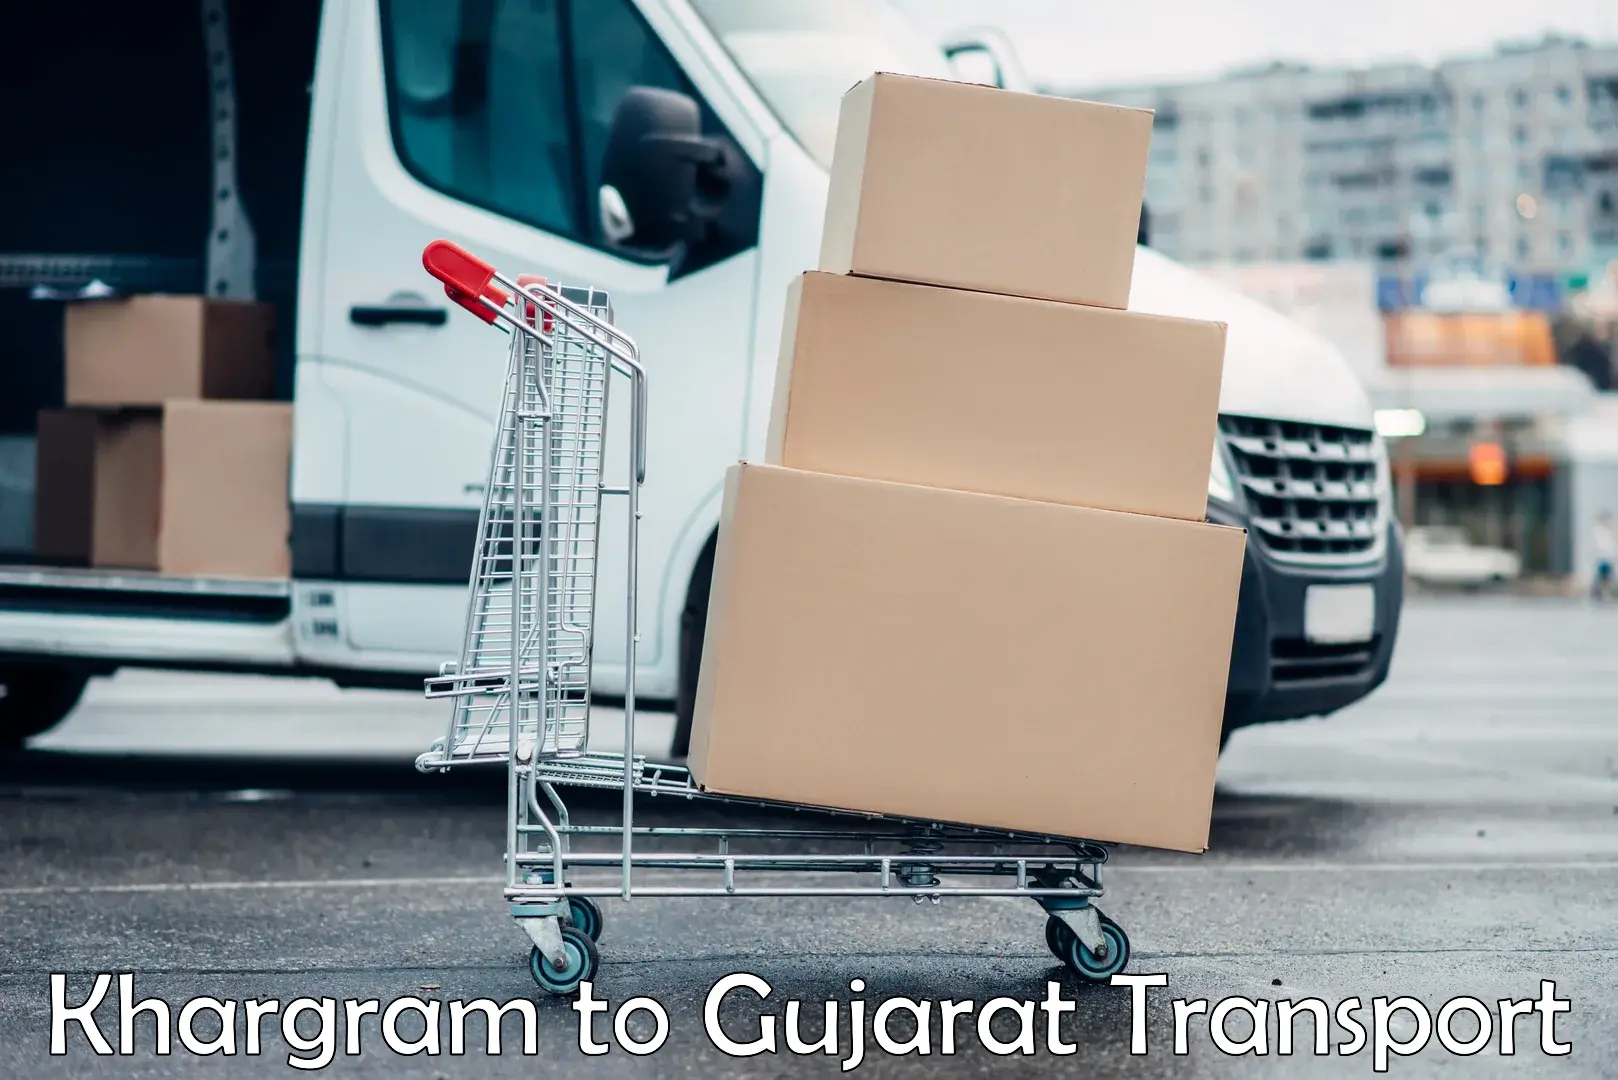 Transport bike from one state to another Khargram to Gujarat